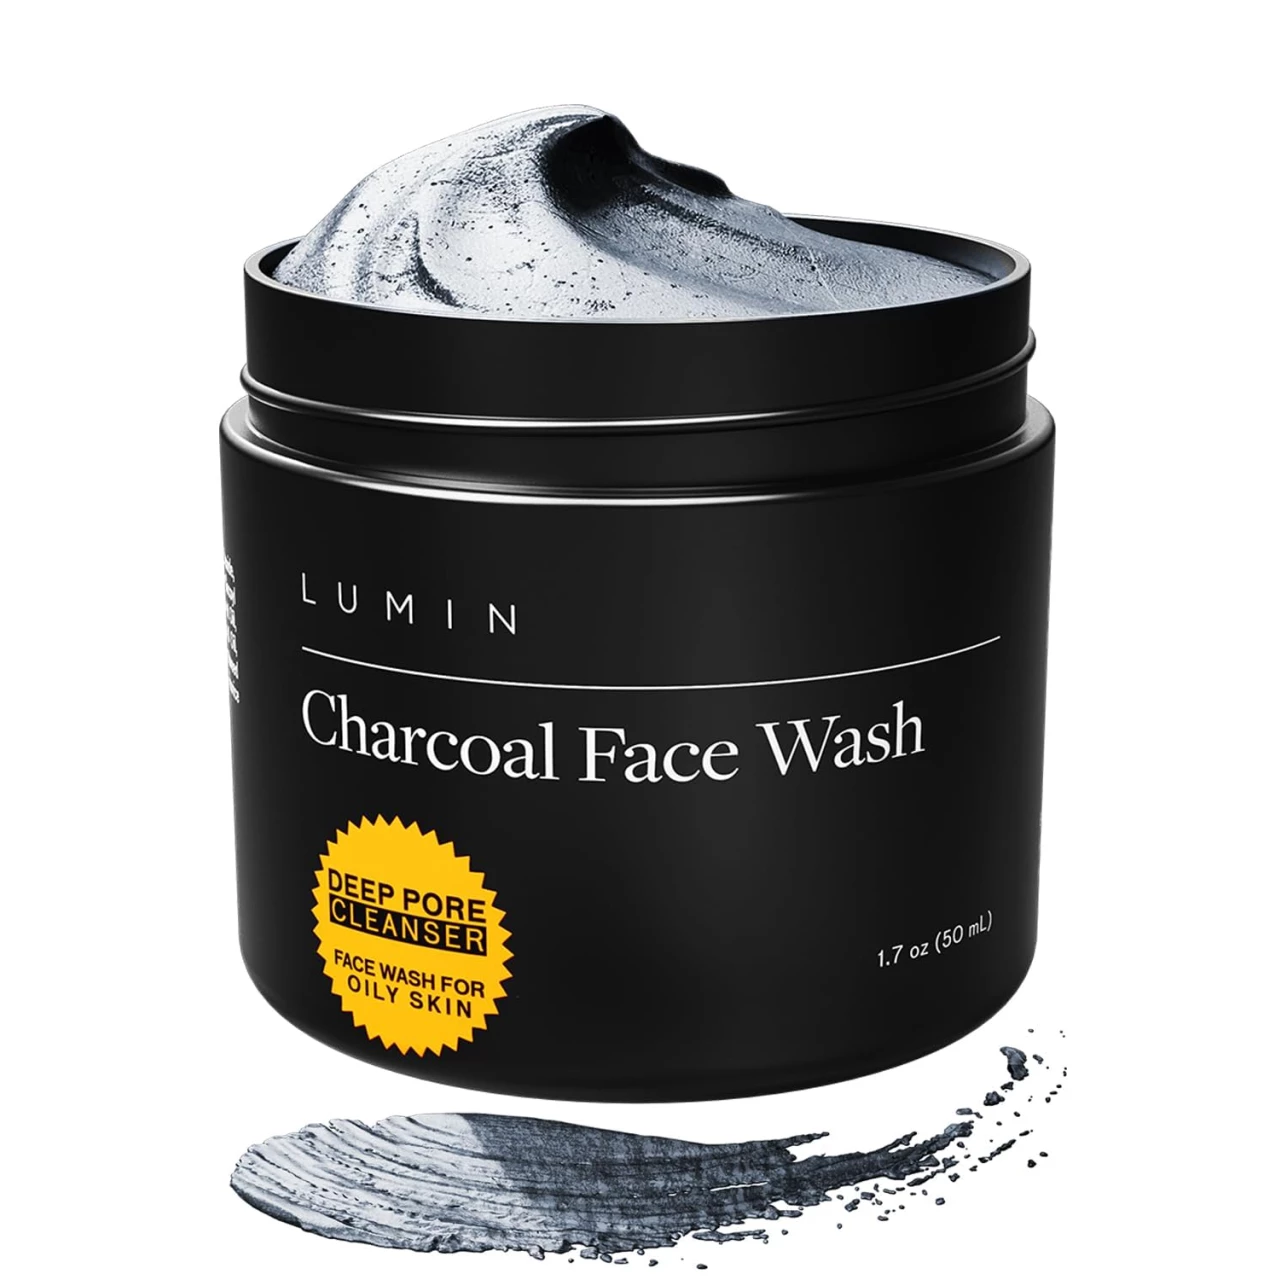 Lumin Charcoal Face Wash Men, Charcoal Cleanser, Mens Charcoal Face Wash, Men Face Wash Charcoal, Men&rsquo;s Facewash, Face Cleanser Charcoal, Charcol Face Wash, Charcoal Facewash 1.7oz